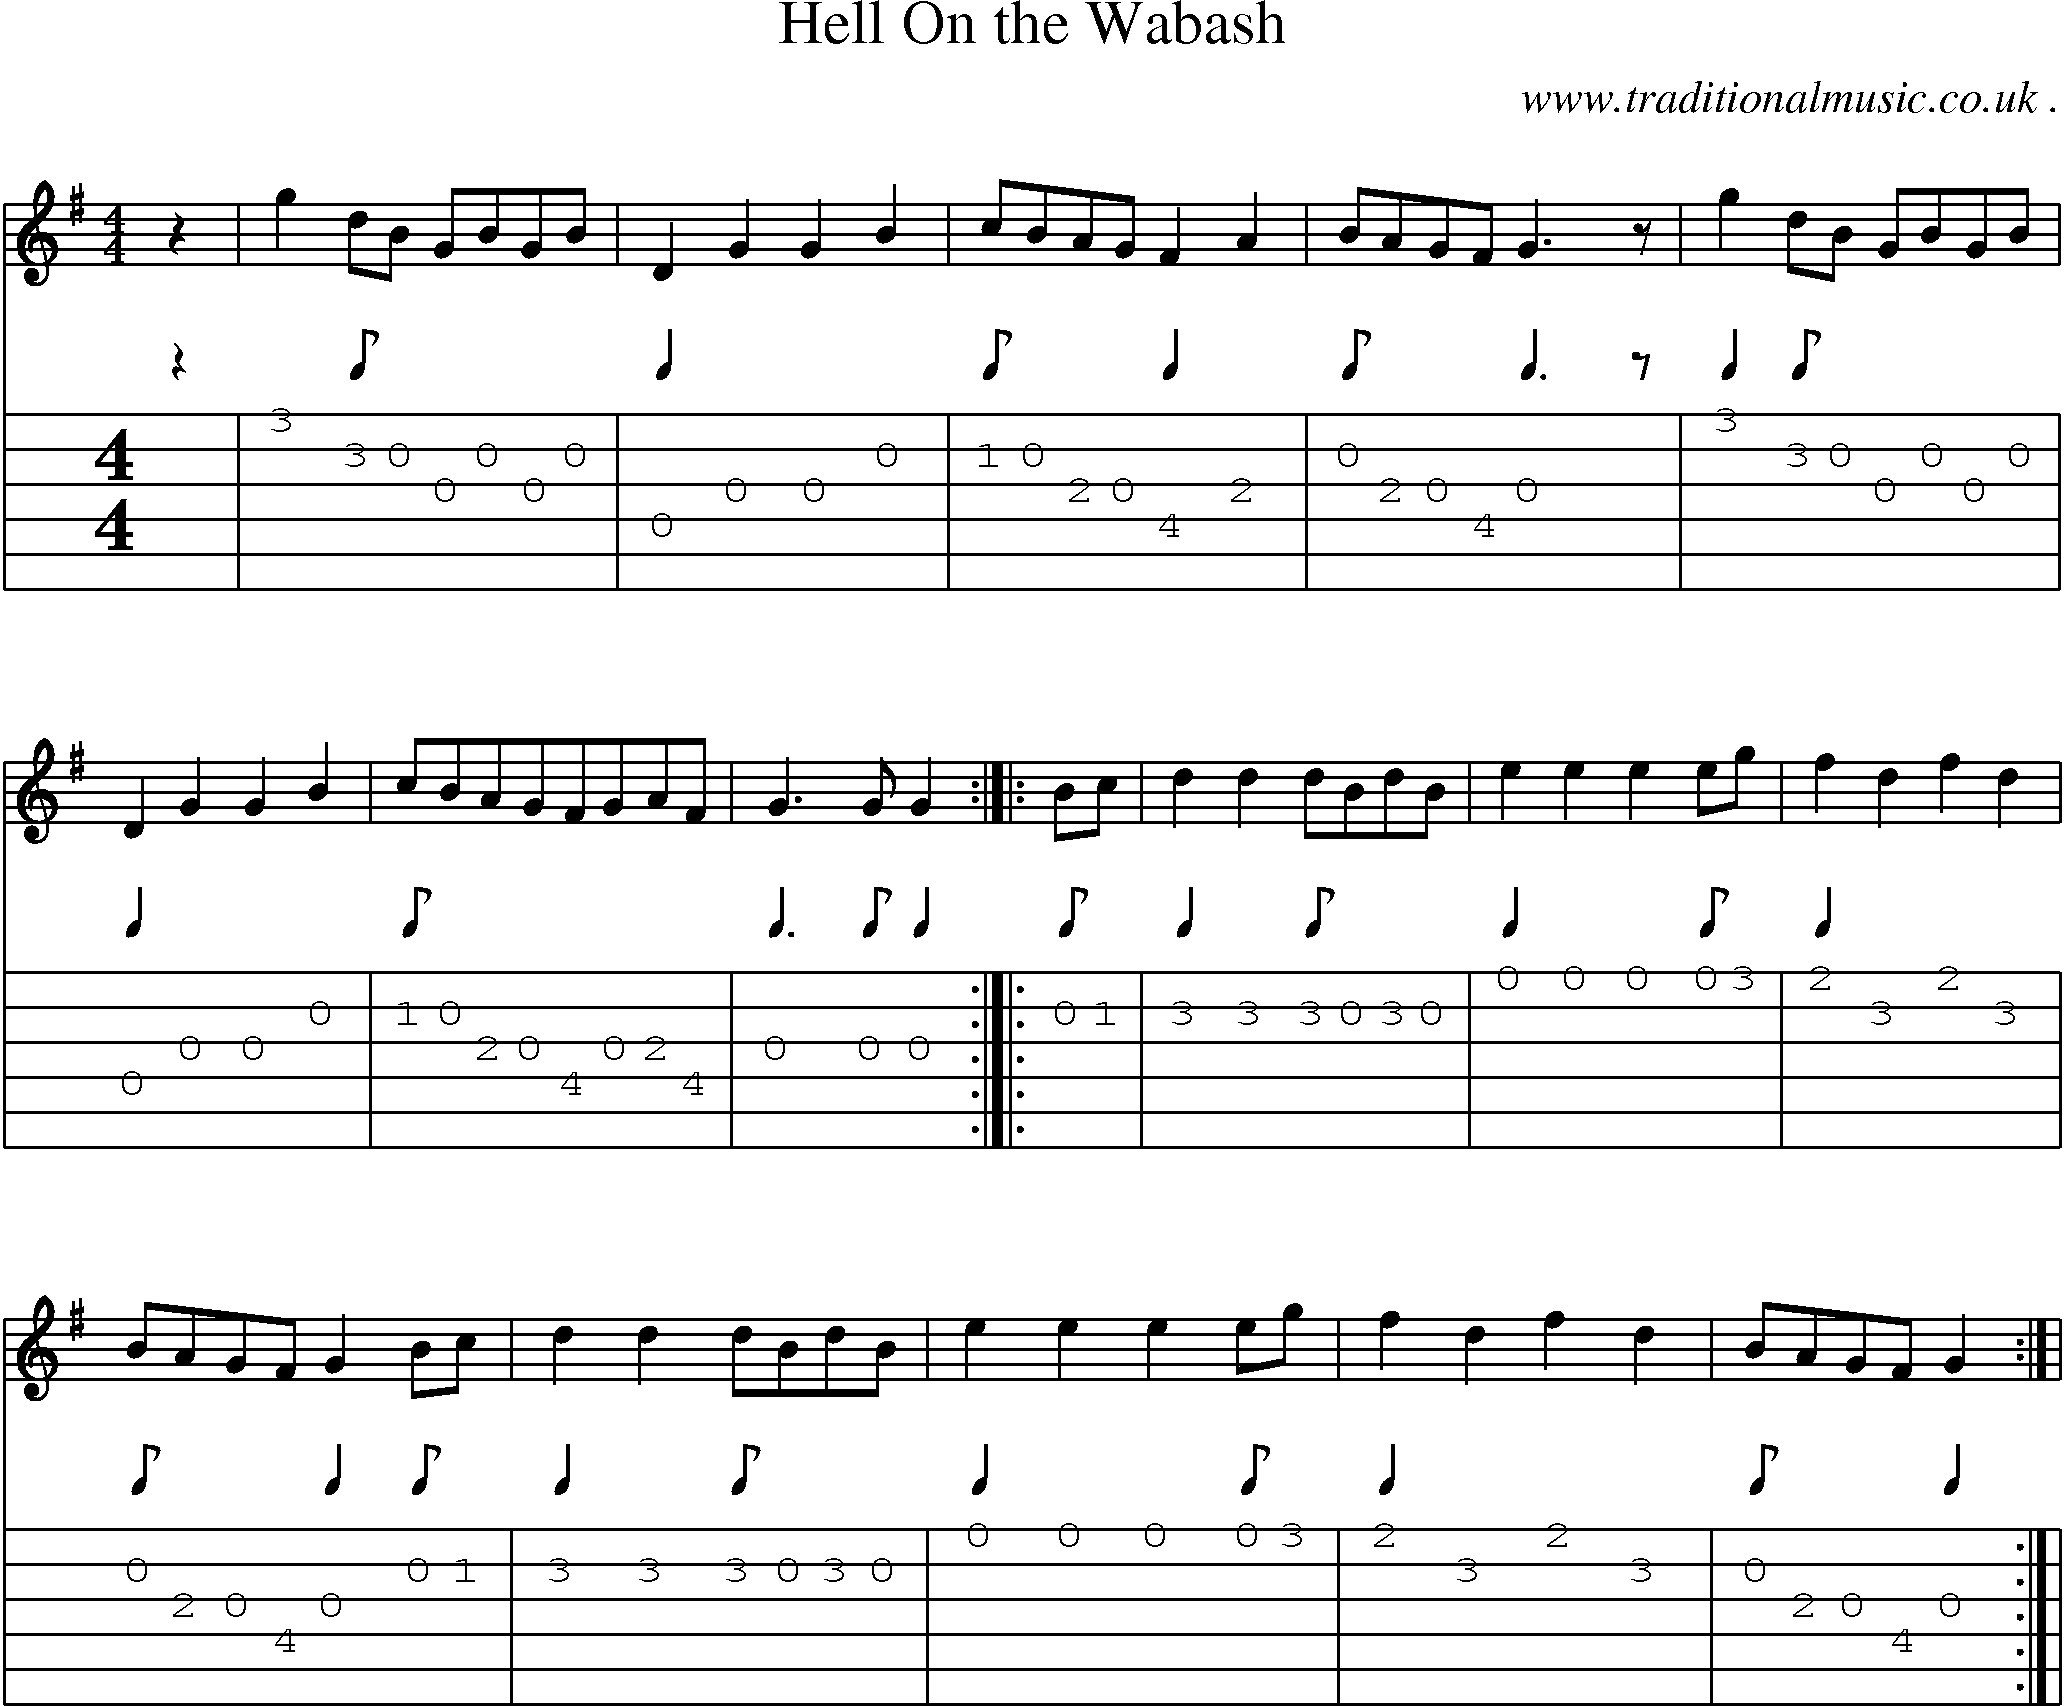 Music Score and Guitar Tabs for Hell On The Wabash